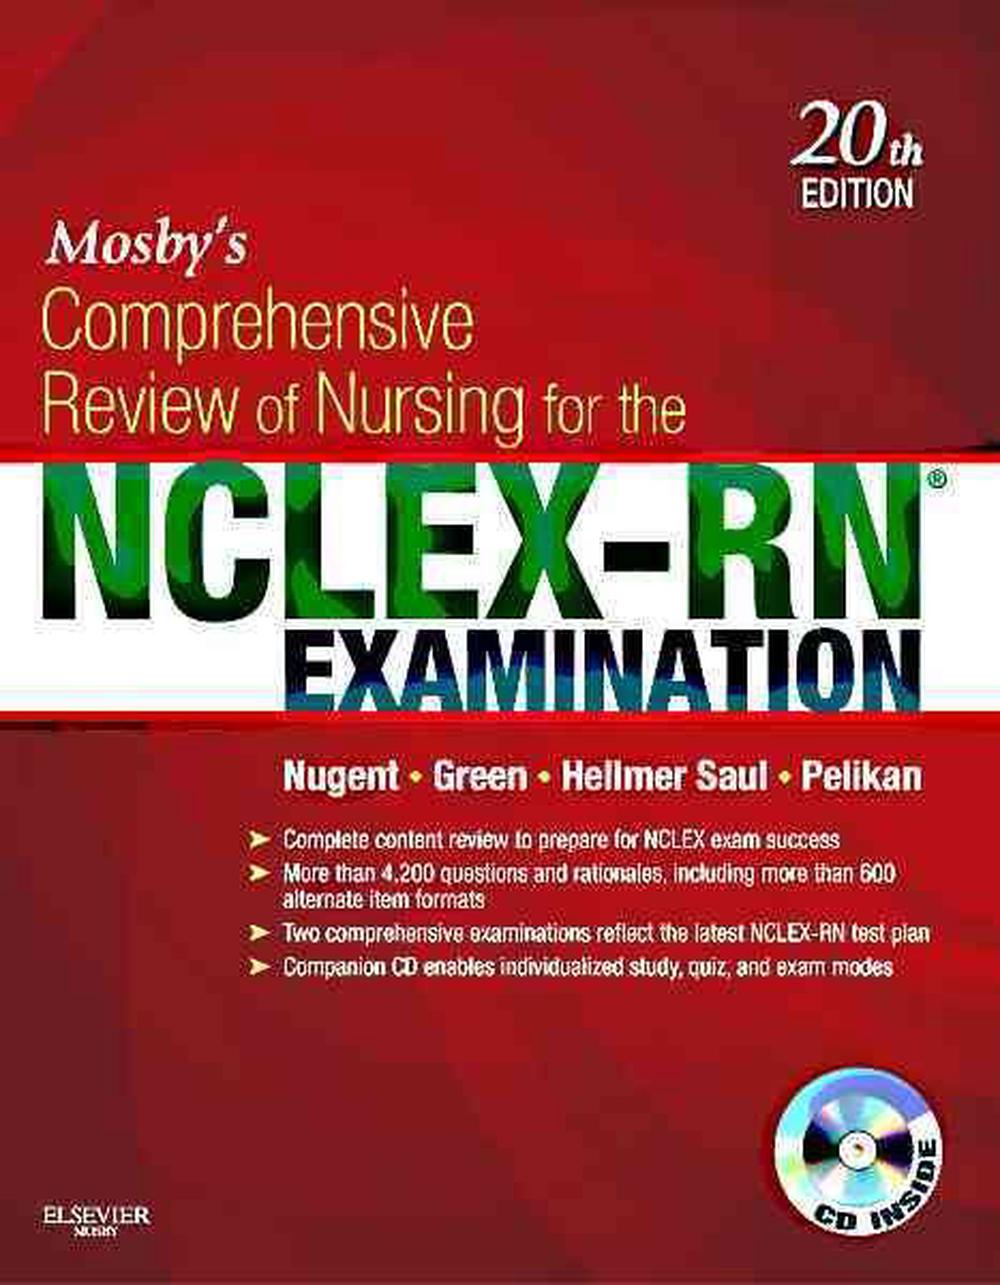 Mosby's Comprehensive Review of Nursing for the NCLEXRN by Patricia M